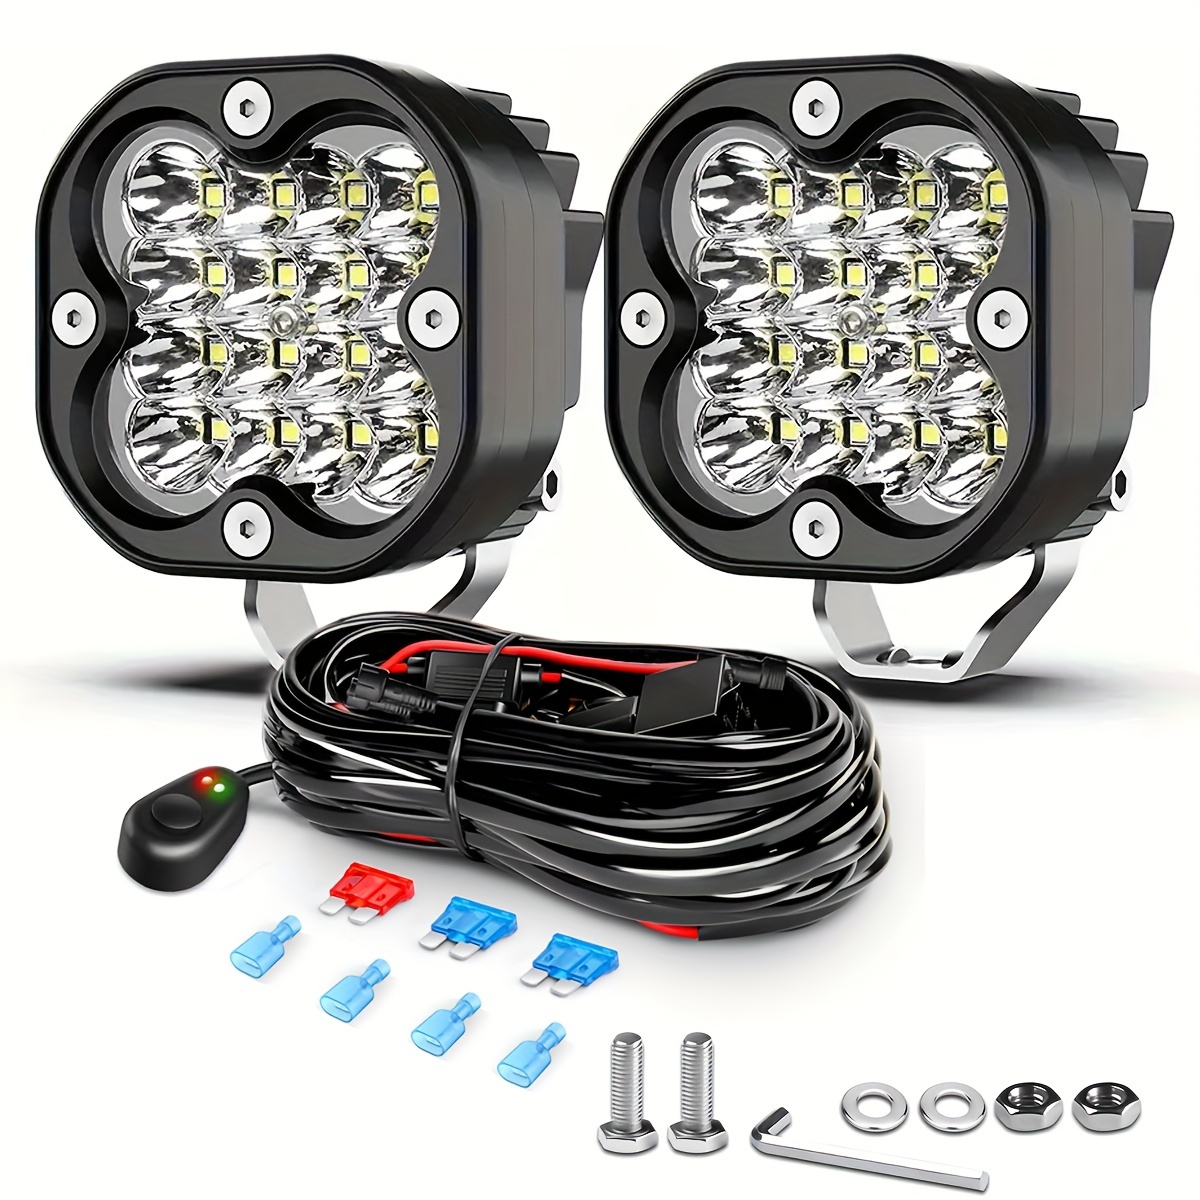 Cheap 4 Inch 102W LED Car Work Light with Strobe Mode for Truck